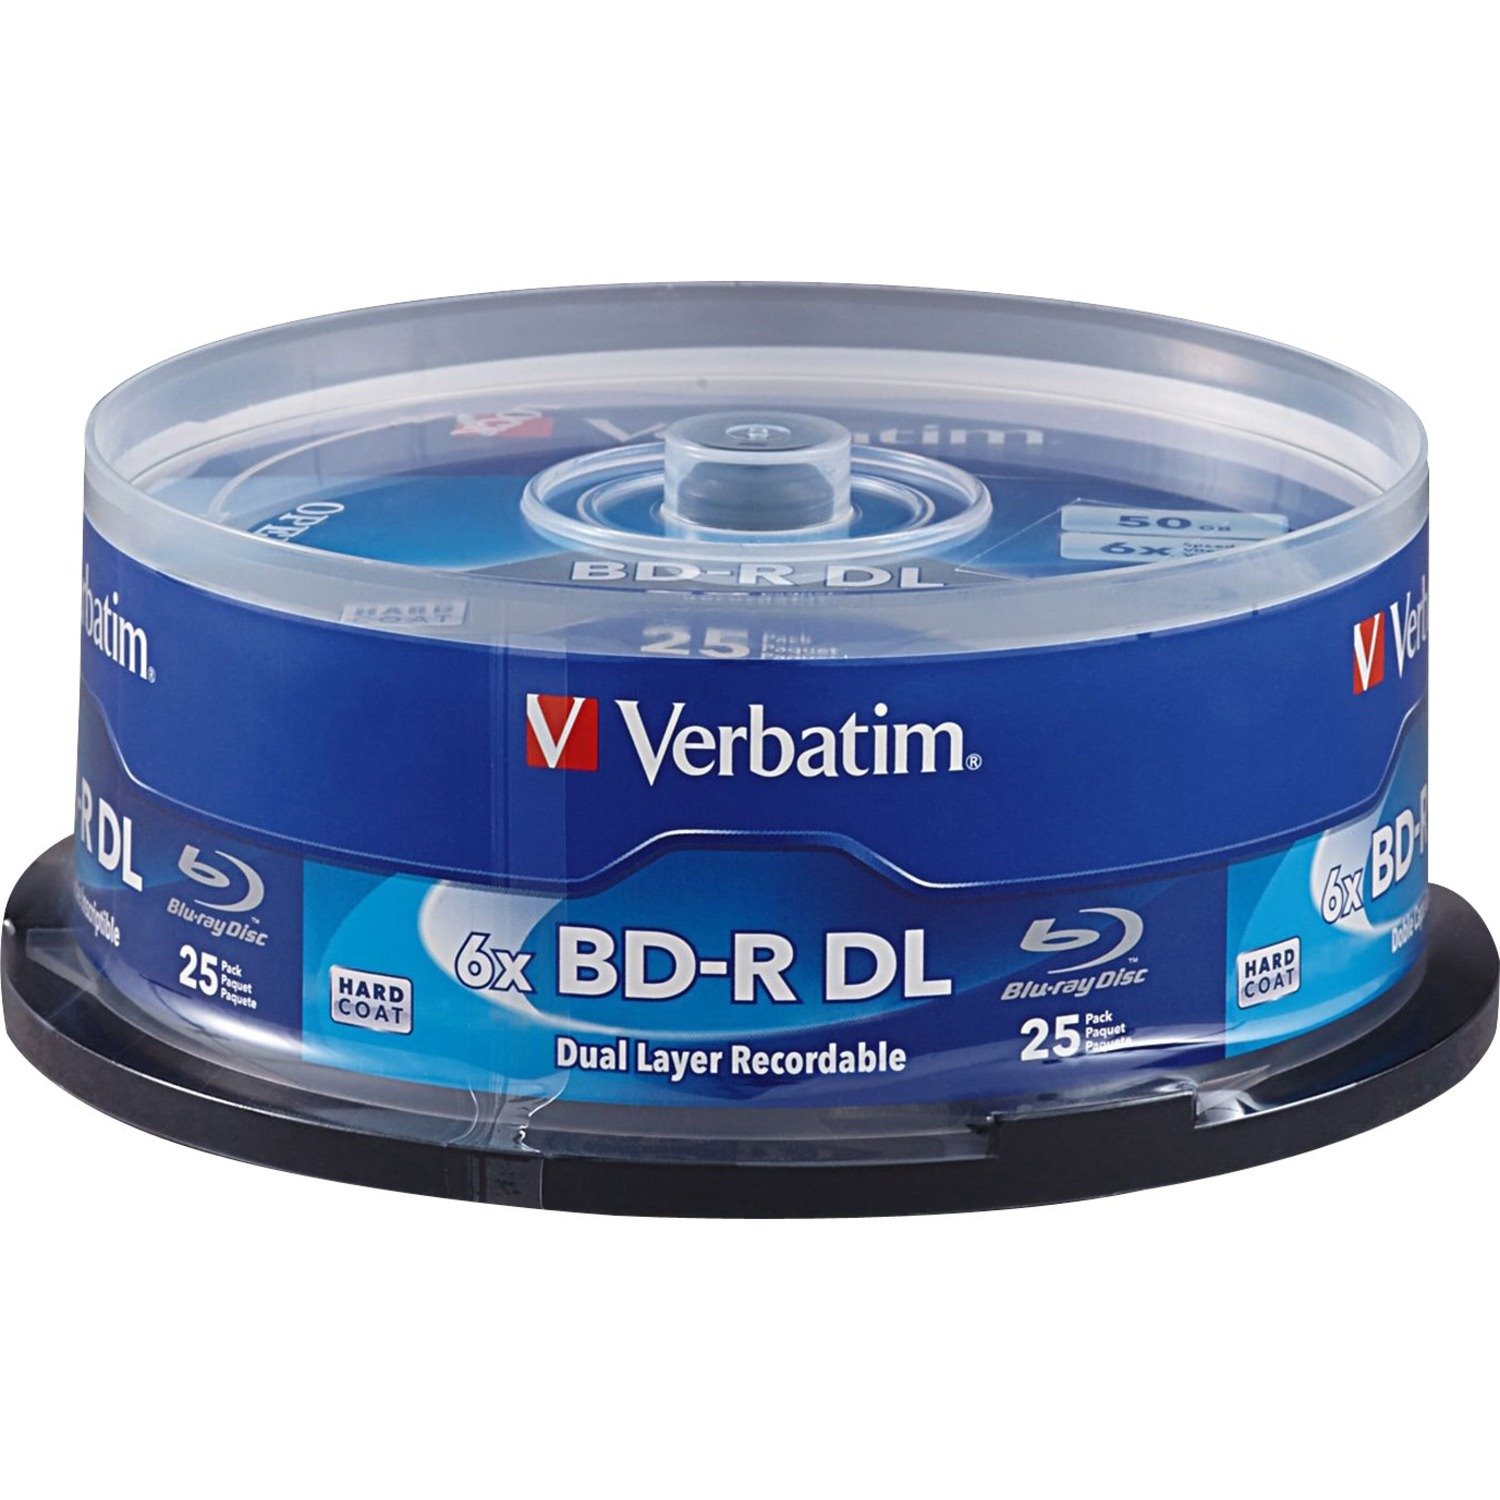 Verbatim BD-R DL 50GB 6X with Branded Surface - 25pk Spindle